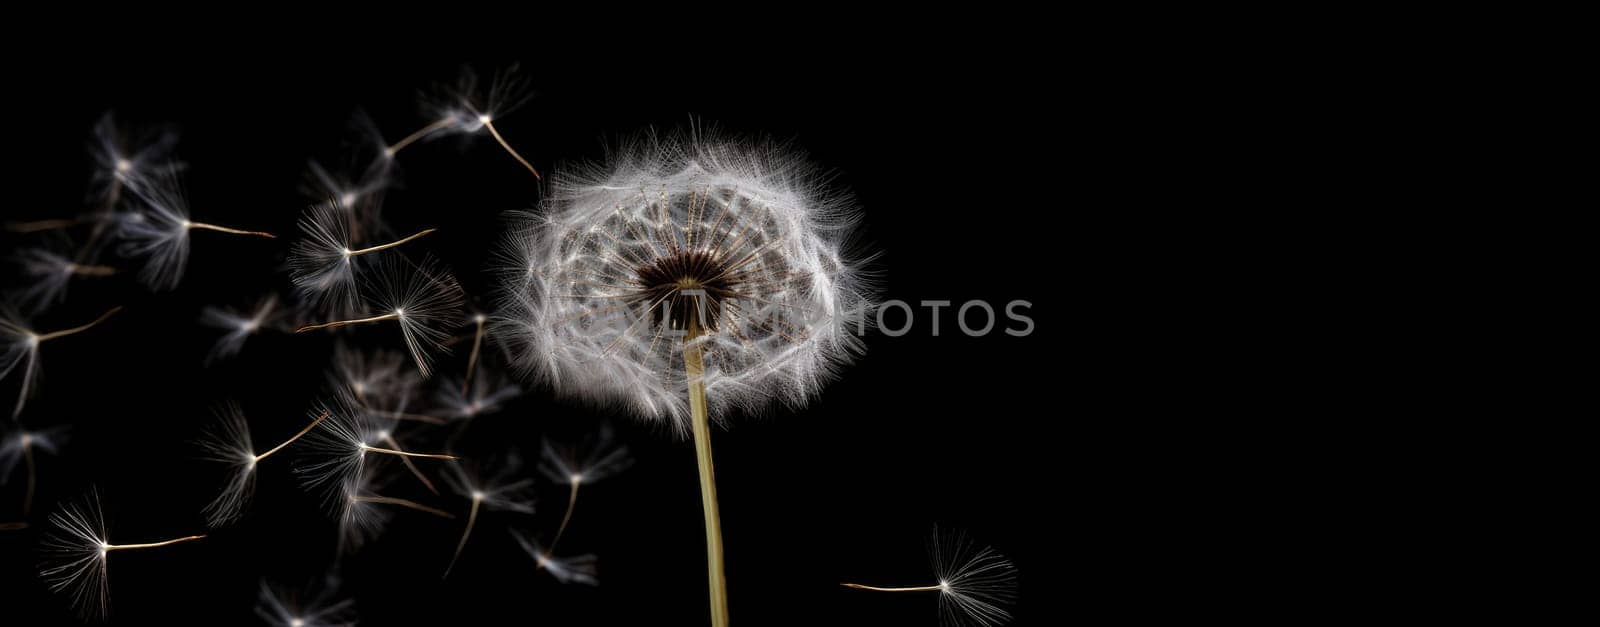 Dandelion scatters into white umbrellas, seeds on a black background. AI generated.